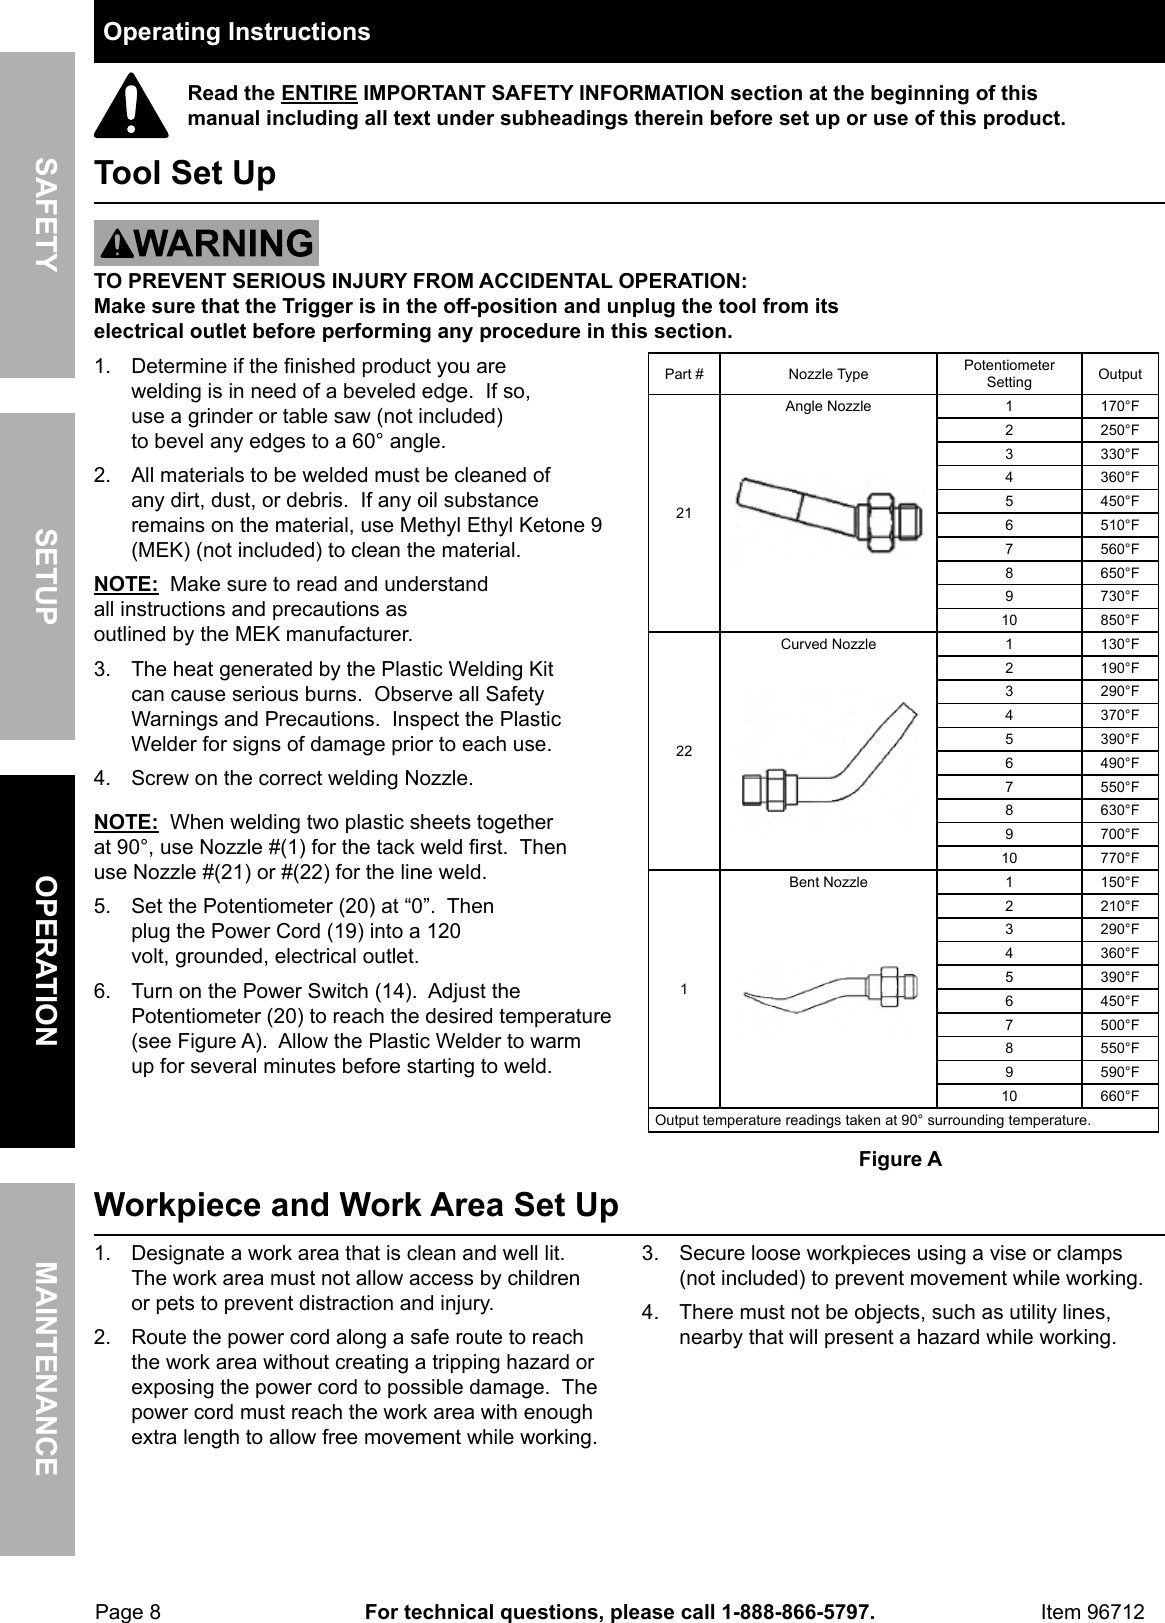 Page 8 of 12 - Harbor-Freight Harbor-Freight-1300-Watt-Plastic-Welding-Kit-With-Air-Motor-And-Temperature-Adjustment-Product-Manual-  Harbor-freight-1300-watt-plastic-welding-kit-with-air-motor-and-temperature-adjustment-product-manual